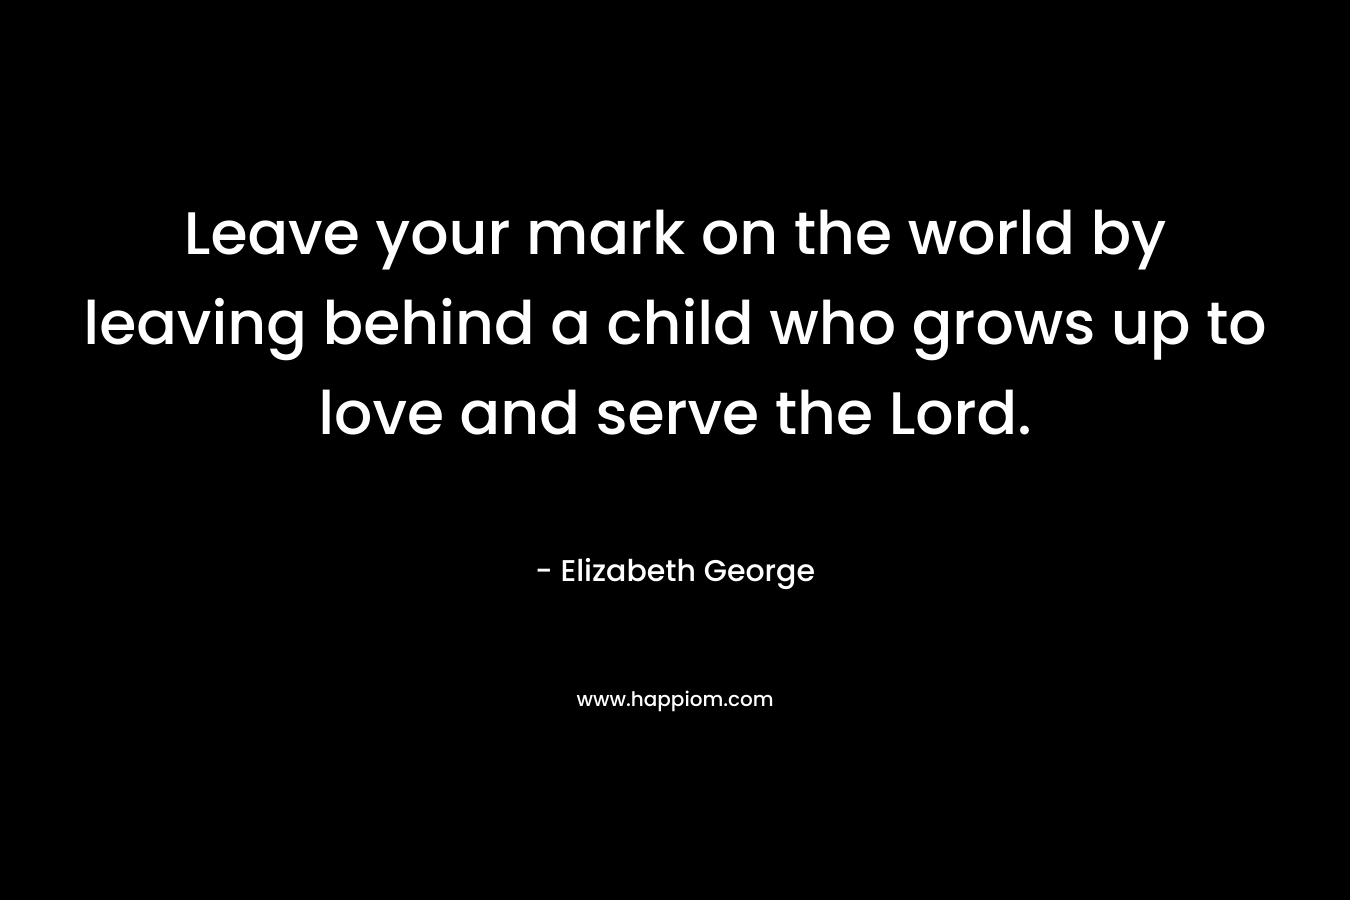 Leave your mark on the world by leaving behind a child who grows up to love and serve the Lord.